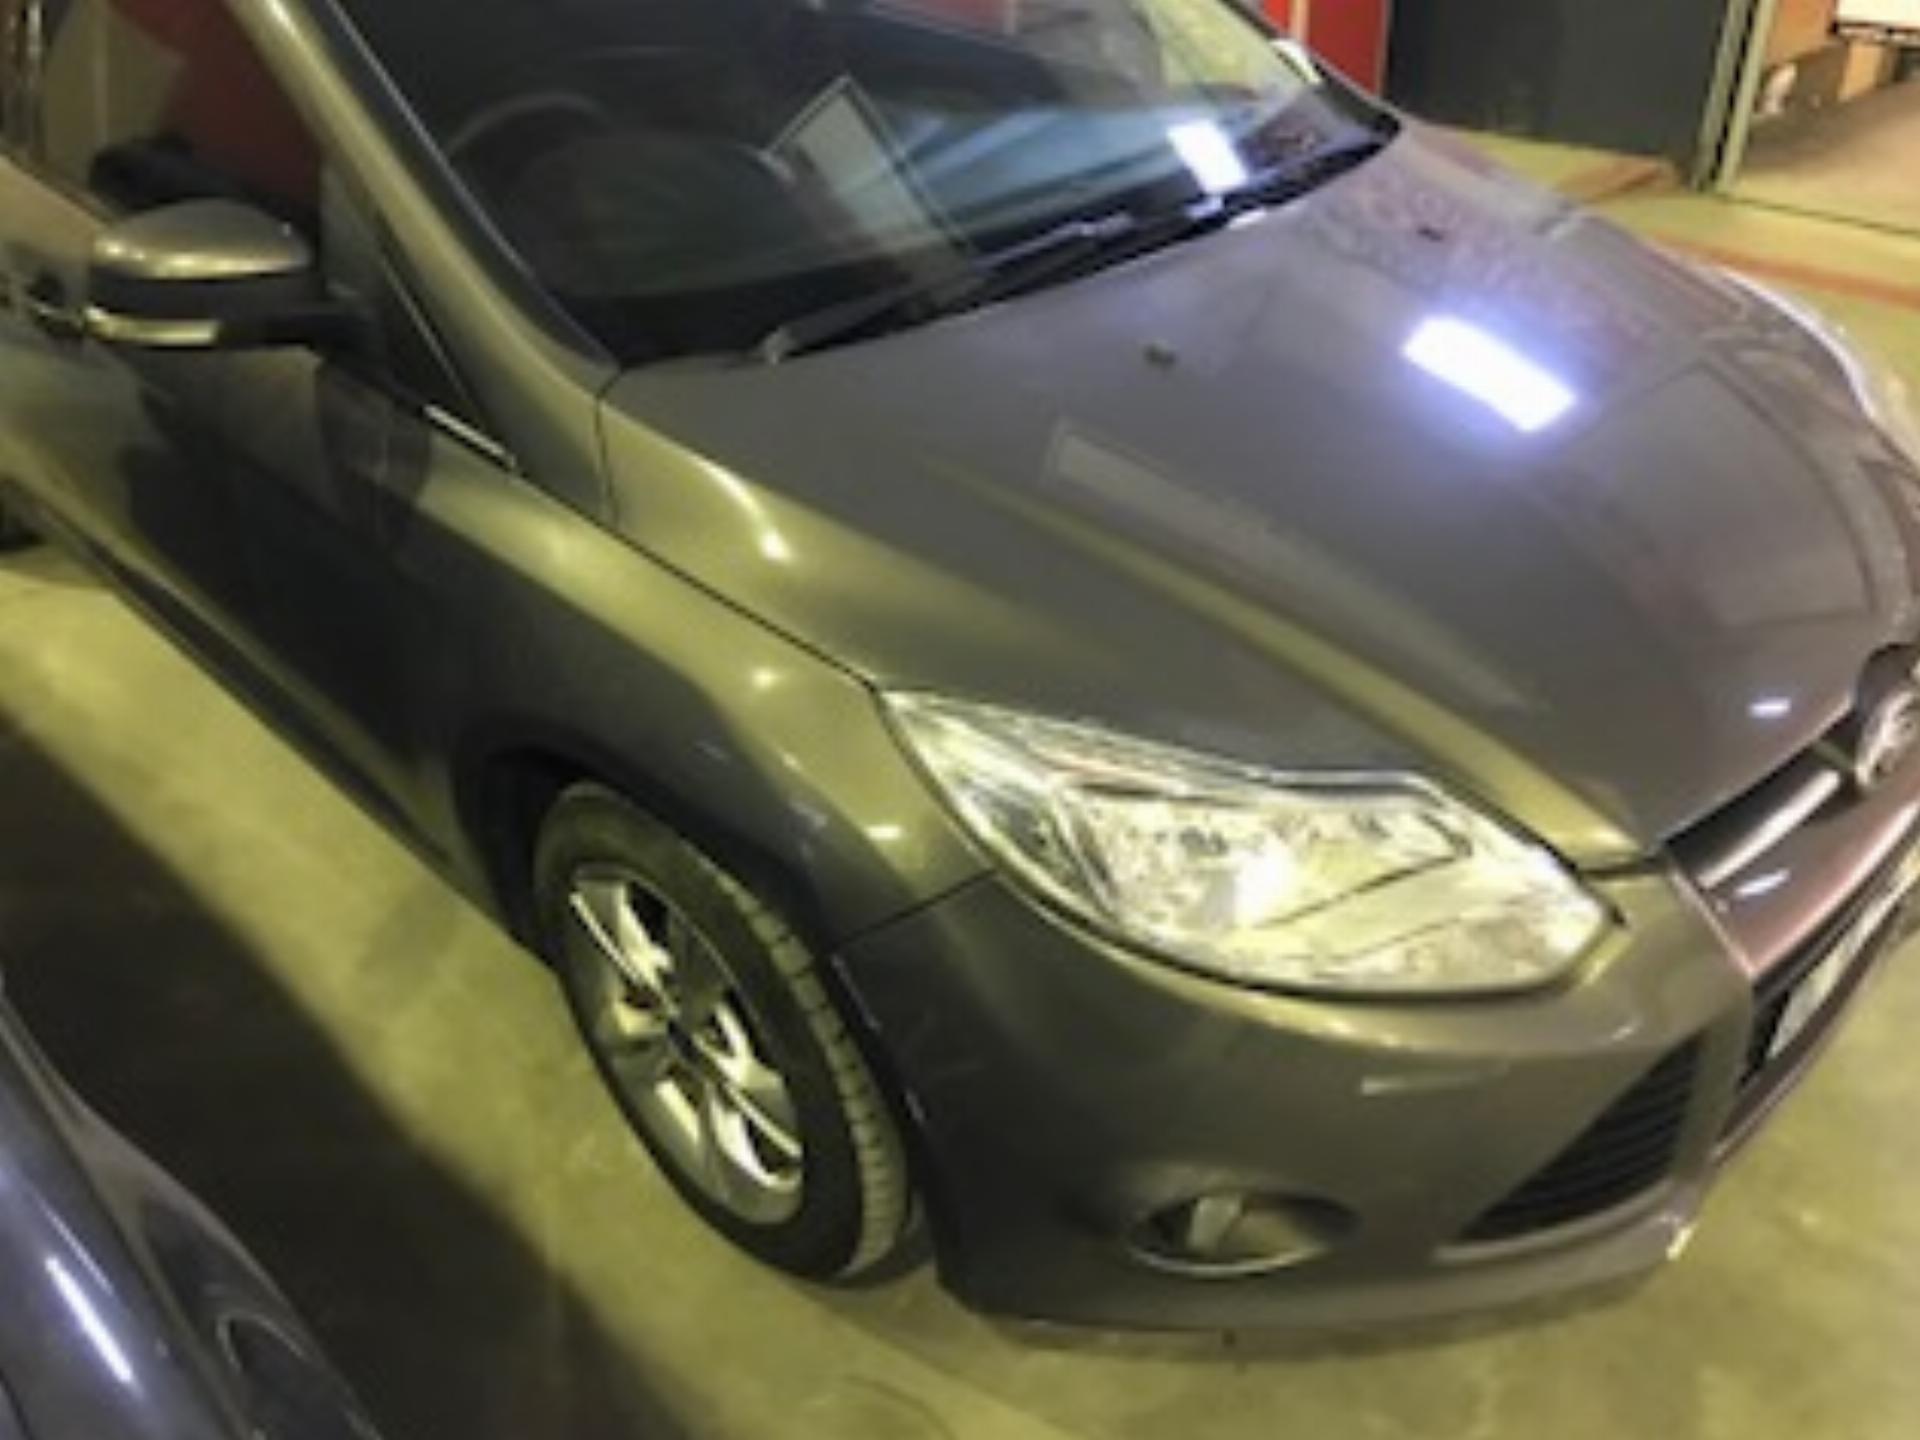 Ford Focus 1.6 TI VCT Trend